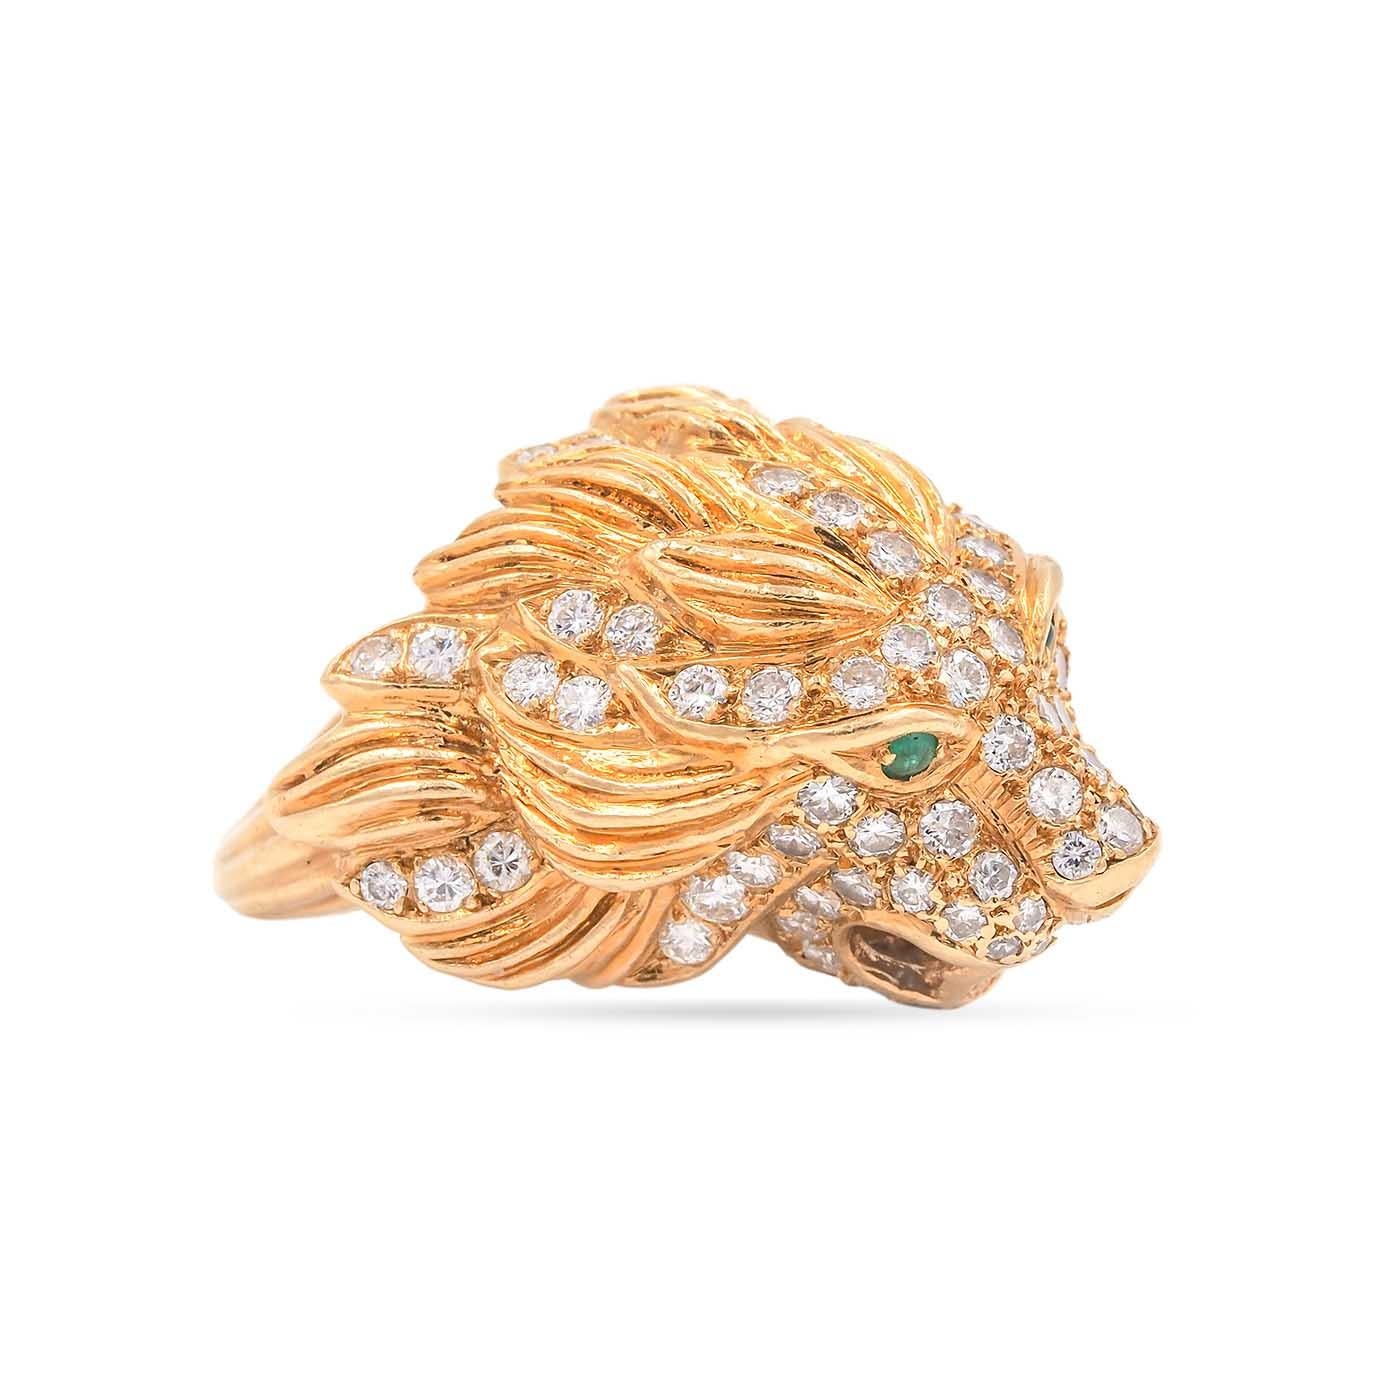 Vintage Diamond Lion's Head Ring composed of 18k yellow gold. Depicting a three dimensional lion's head and mane, set with 80 Round Brilliant Cut diamonds weighing approximately 1.50 carats in total. Diamonds are estimated G-H color & VS1 clarity.